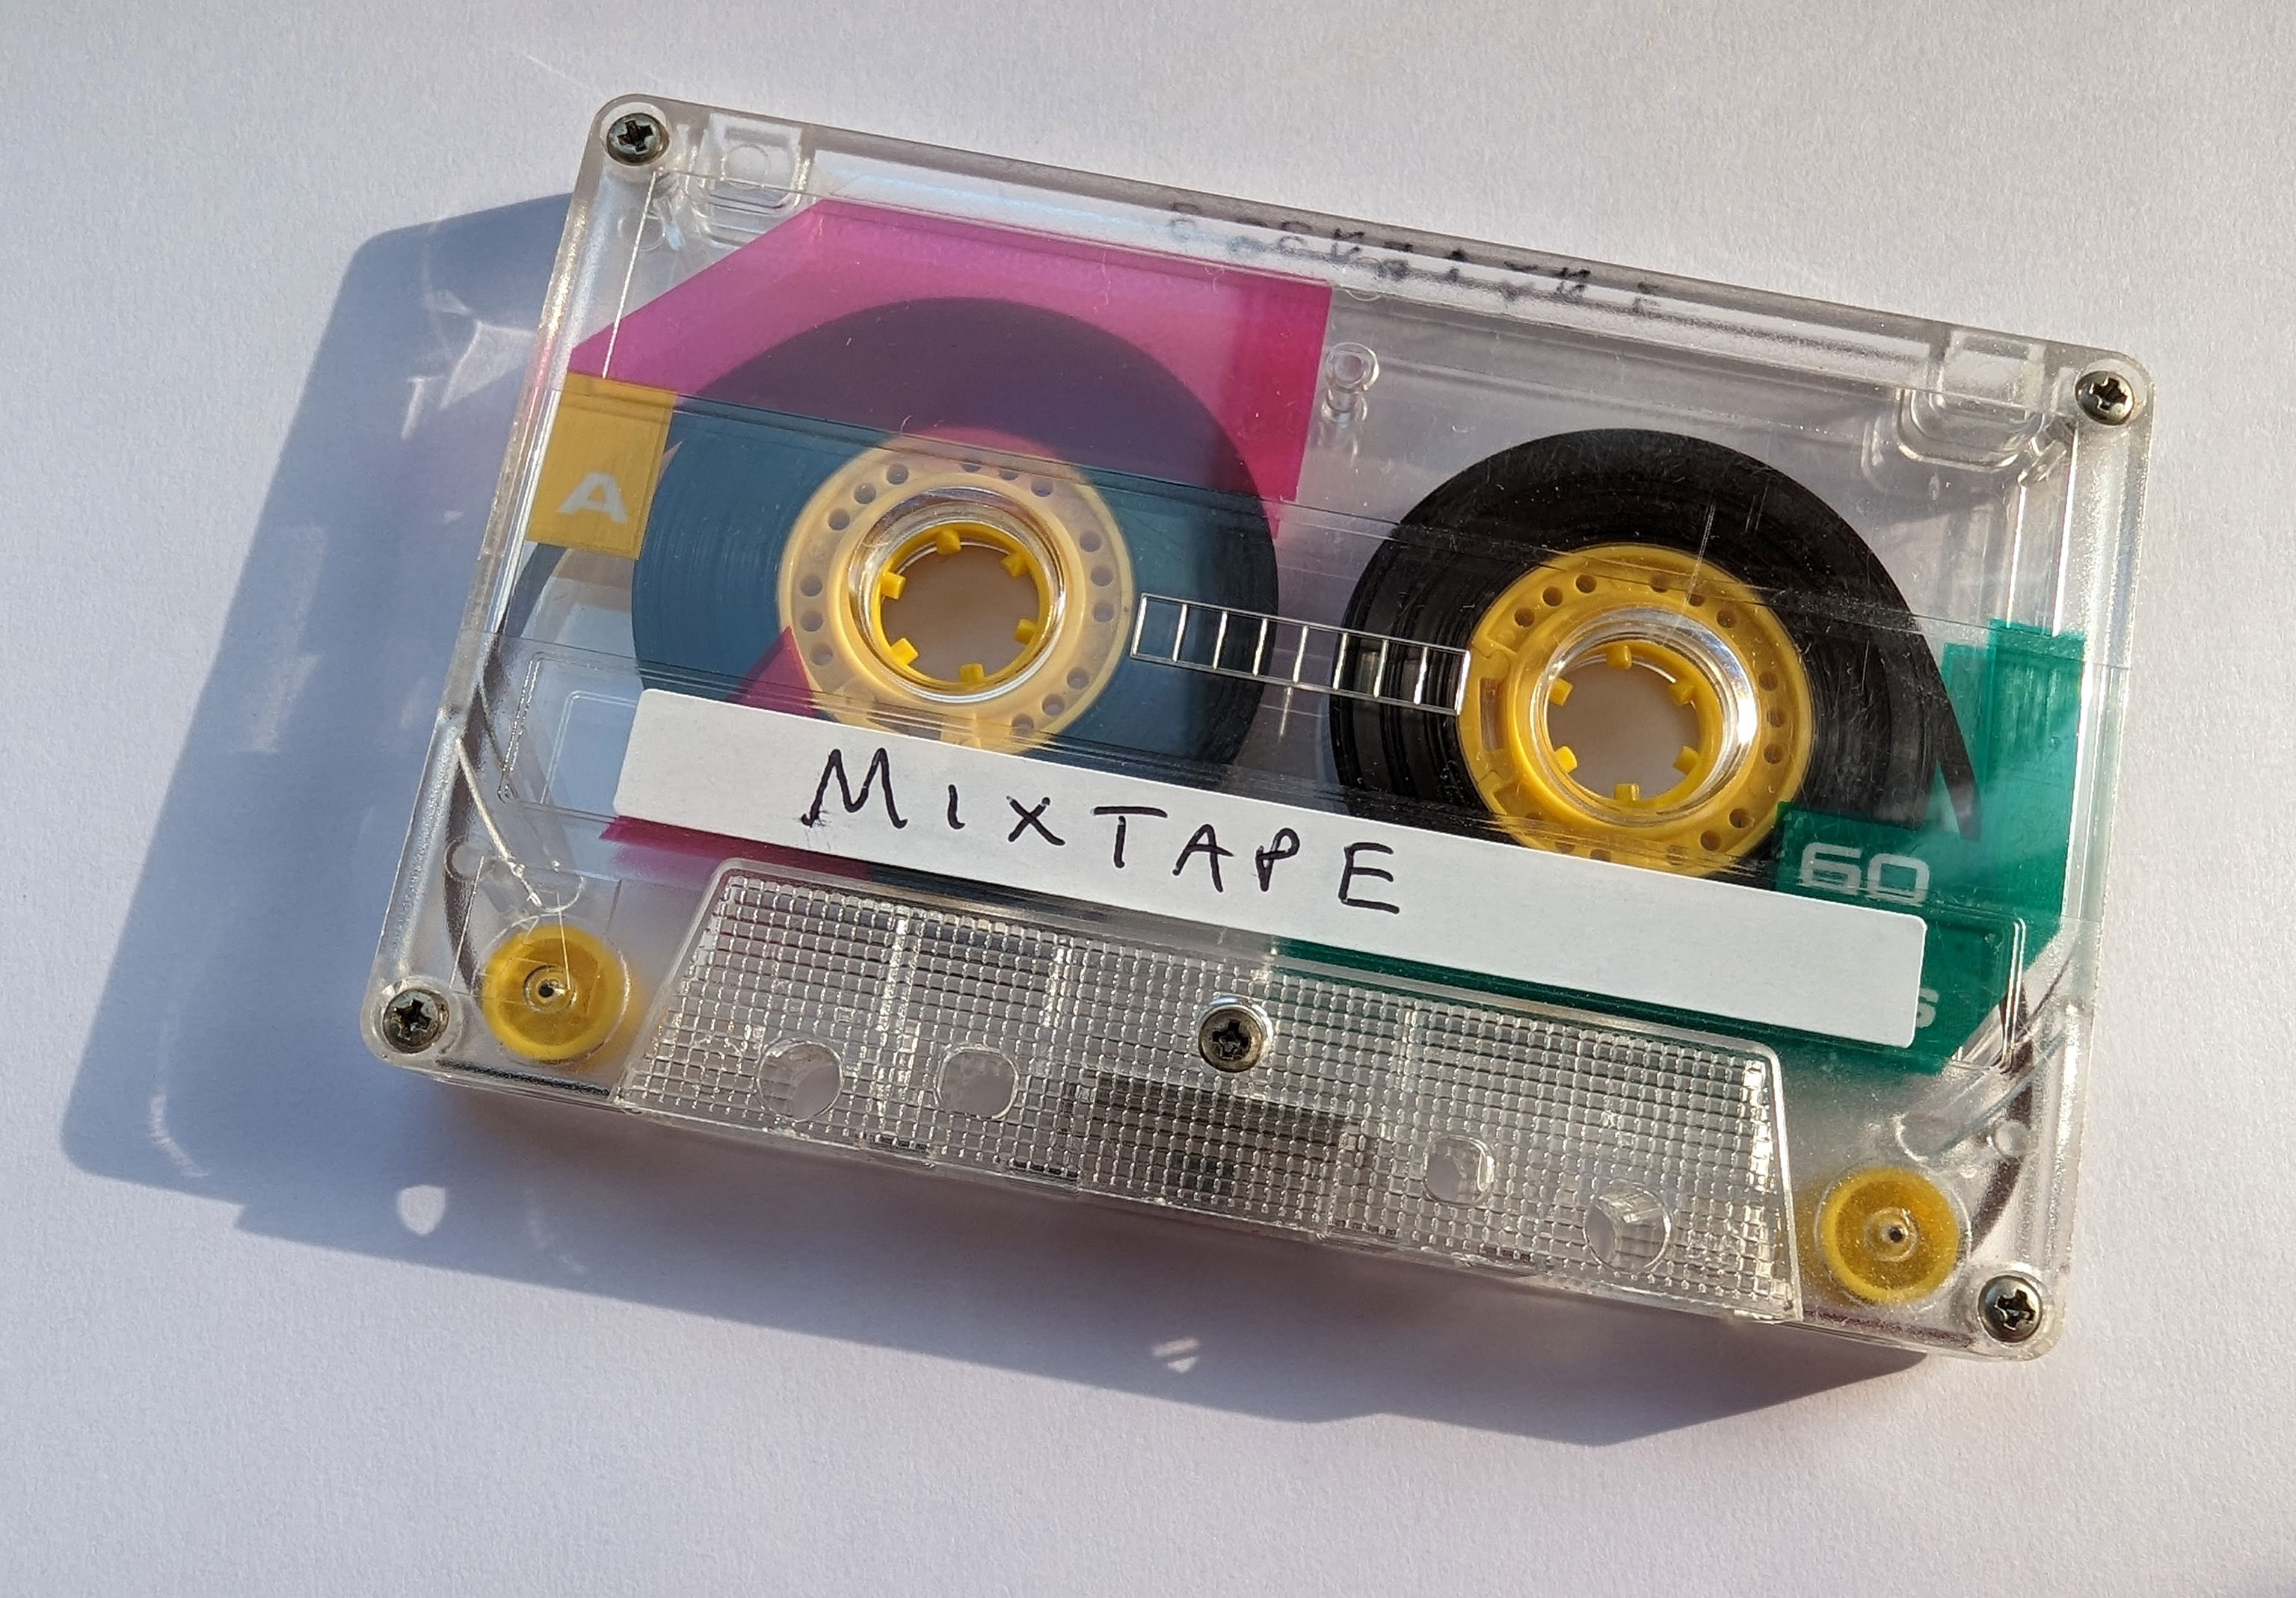 Cassette tape with &quot;MIXTAPE&quot; label, evoking nostalgia for past music recording practices